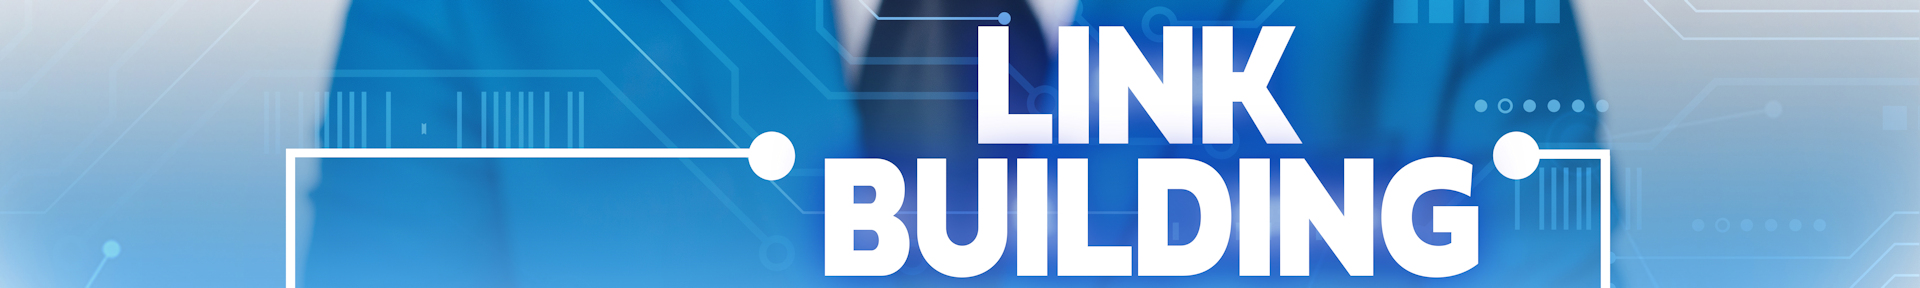 What is Link Building? Link Building Definition.